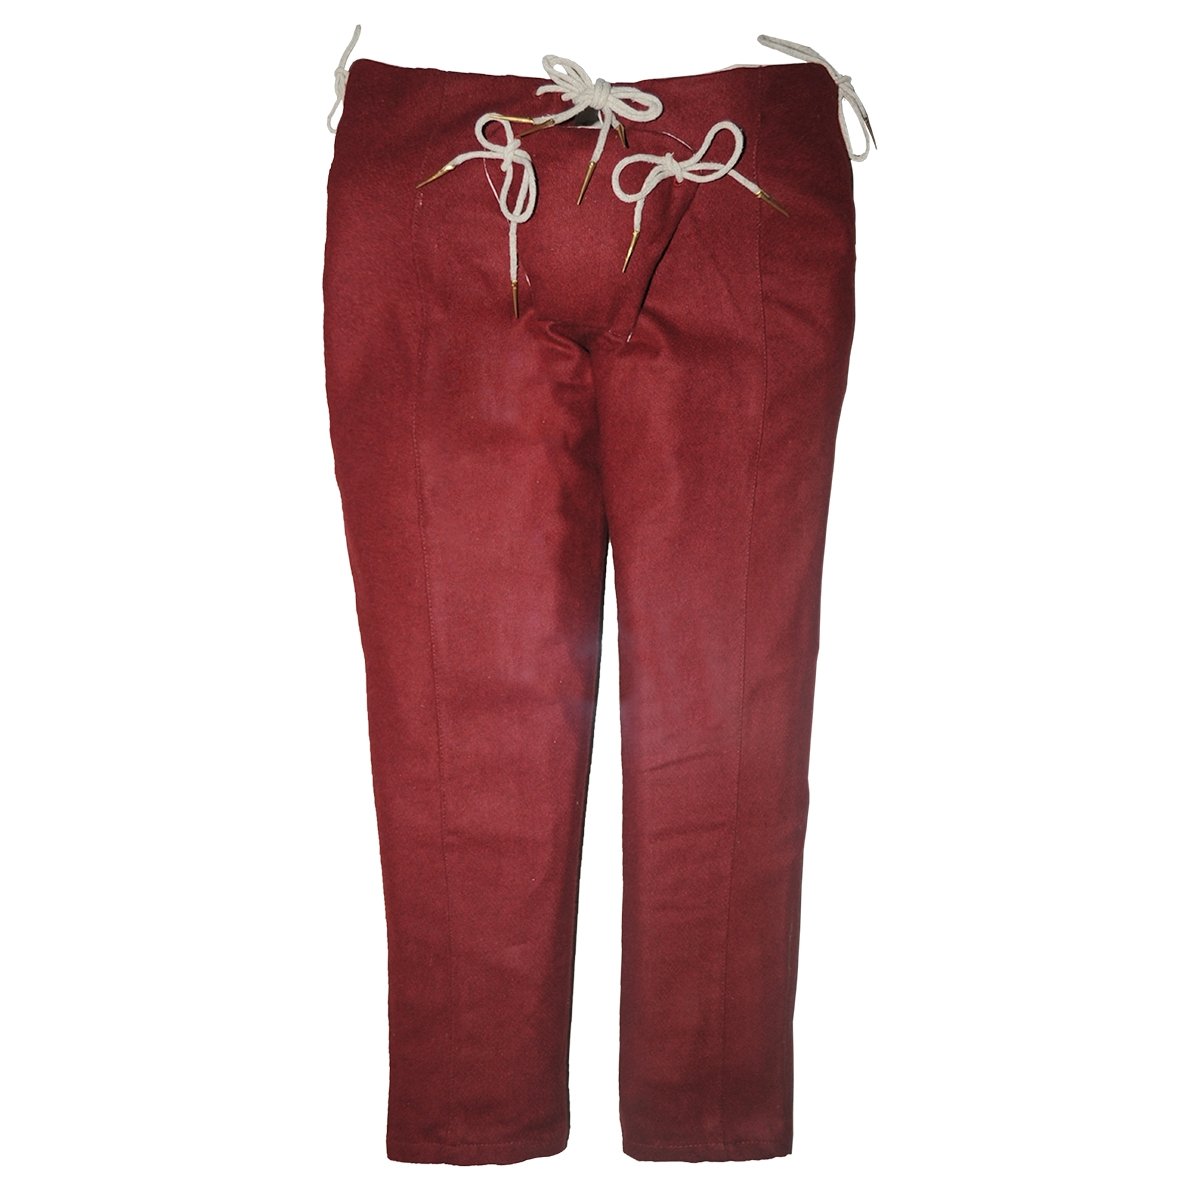 Man's 15th C. Trousers - Maroon, Size S